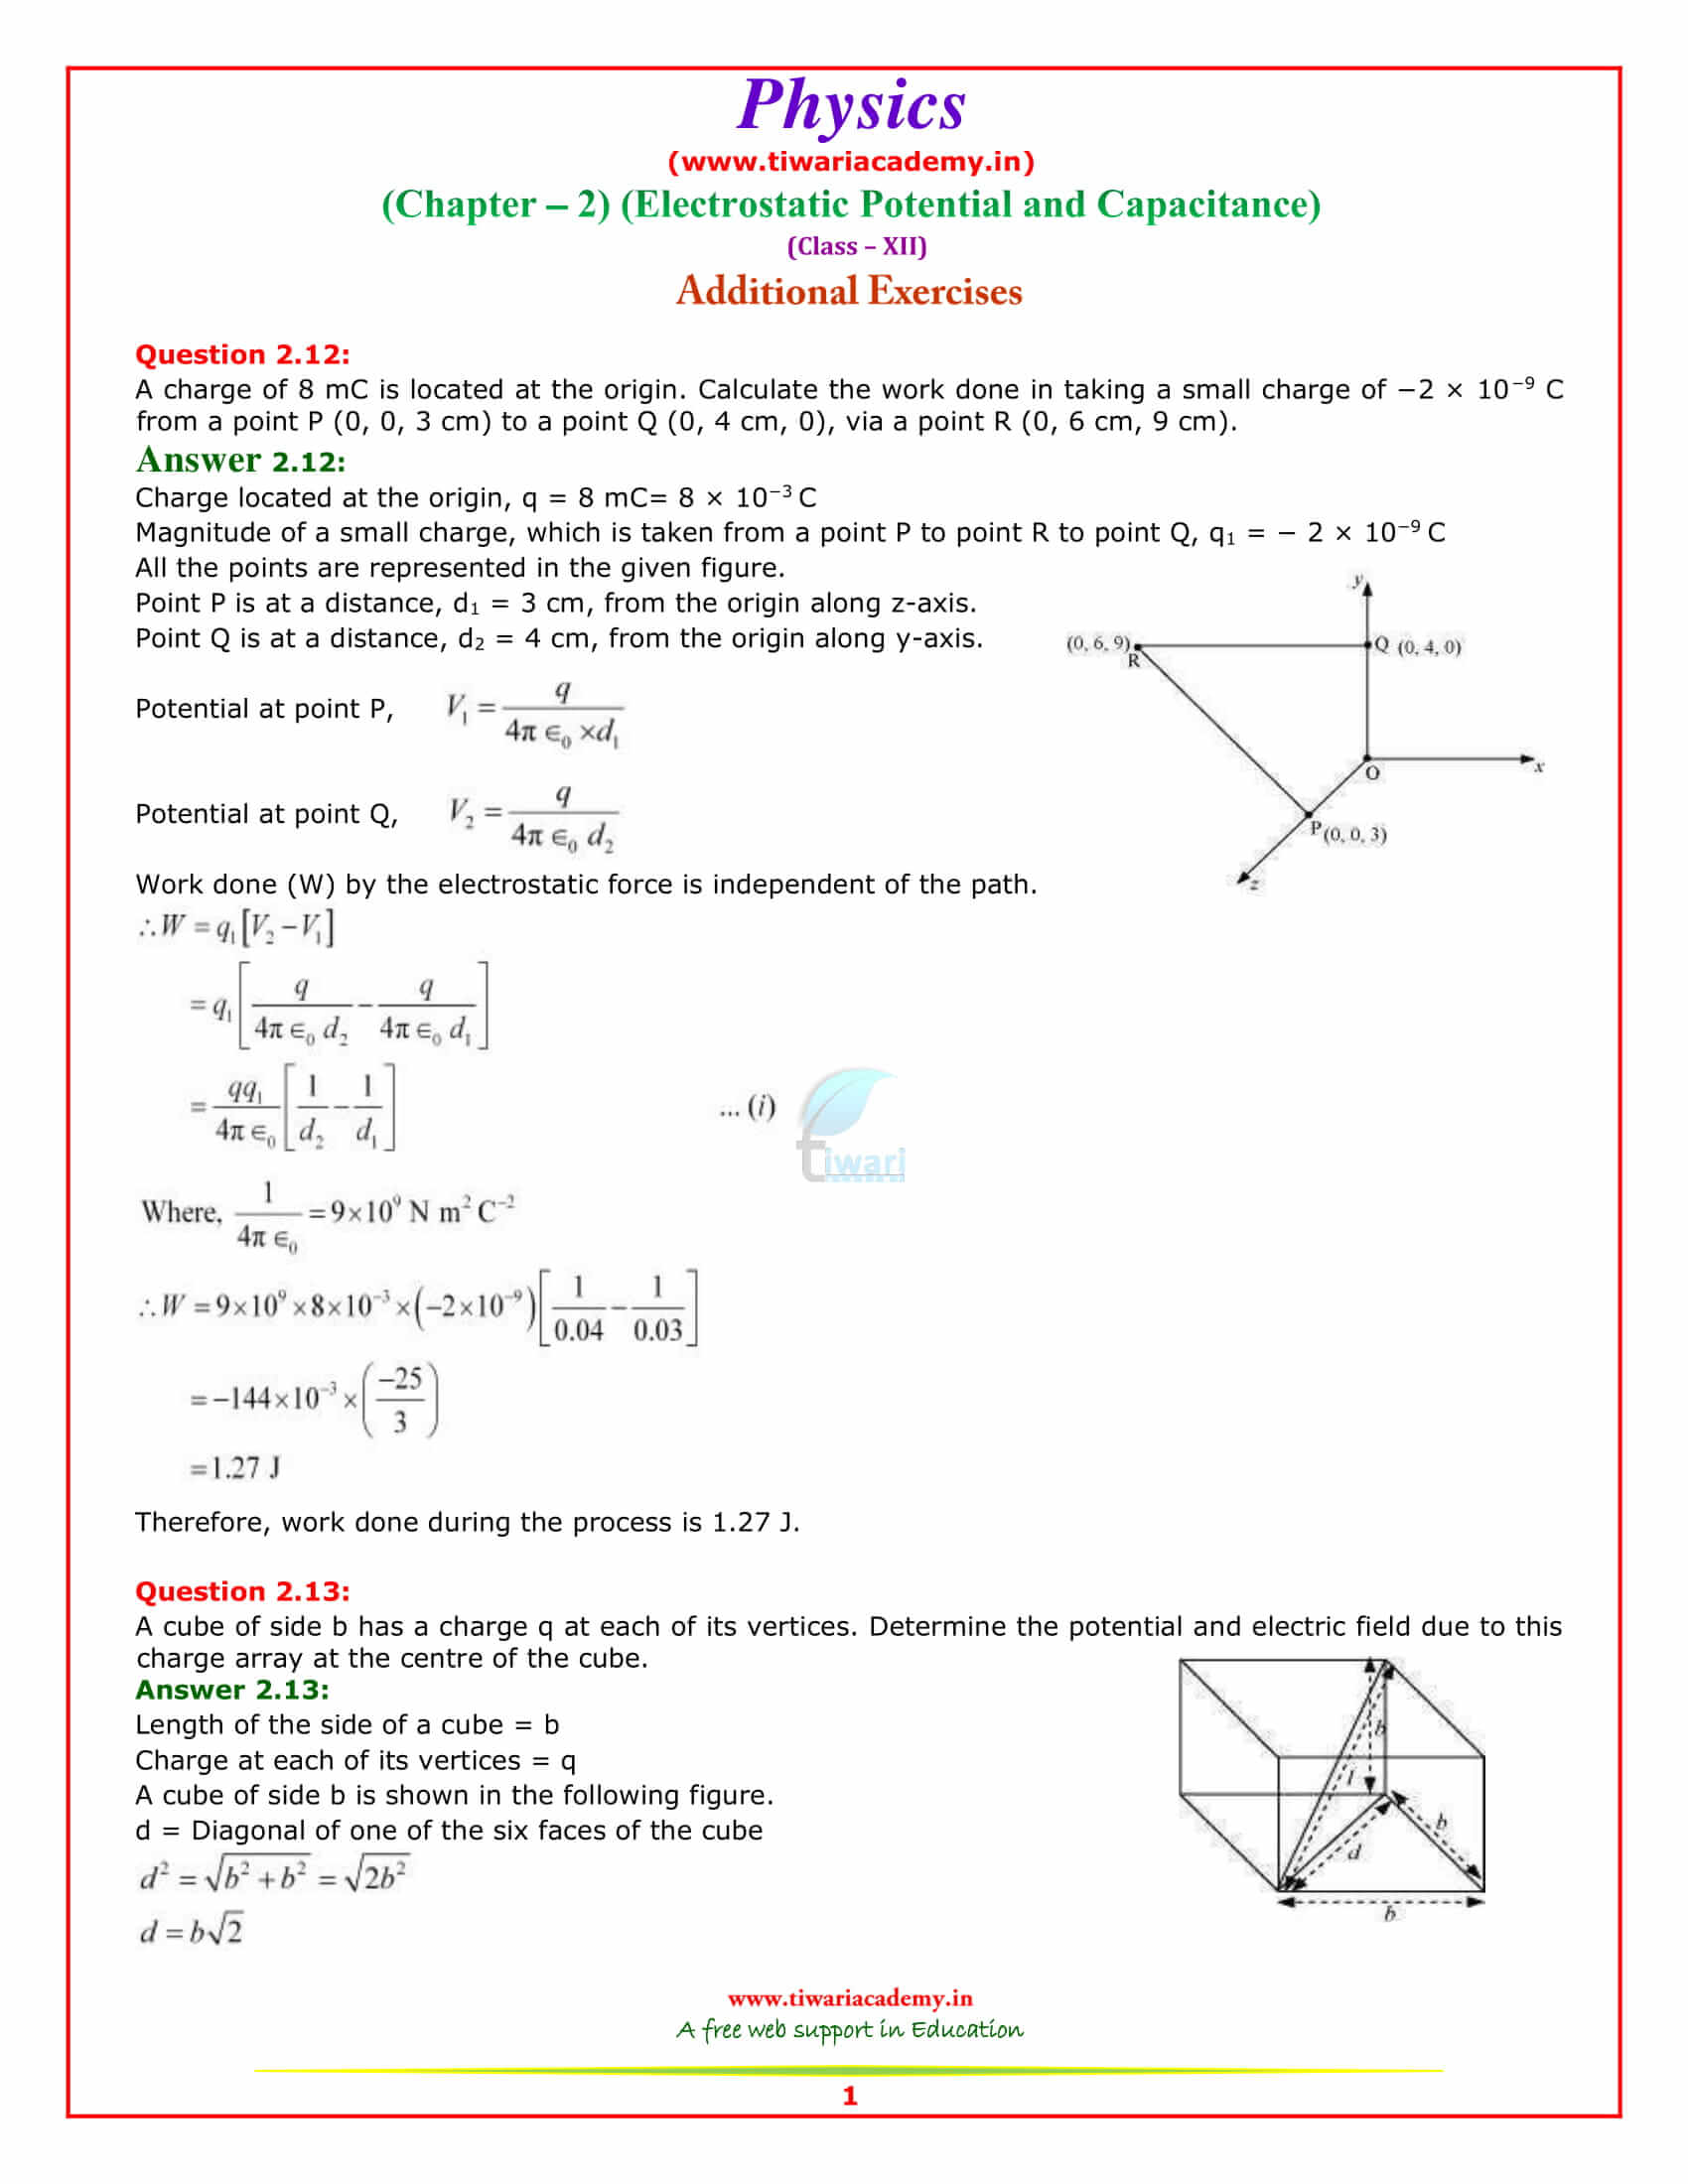 NCERT Solutions for Class 12 Physics Chapter 2 additional exercises